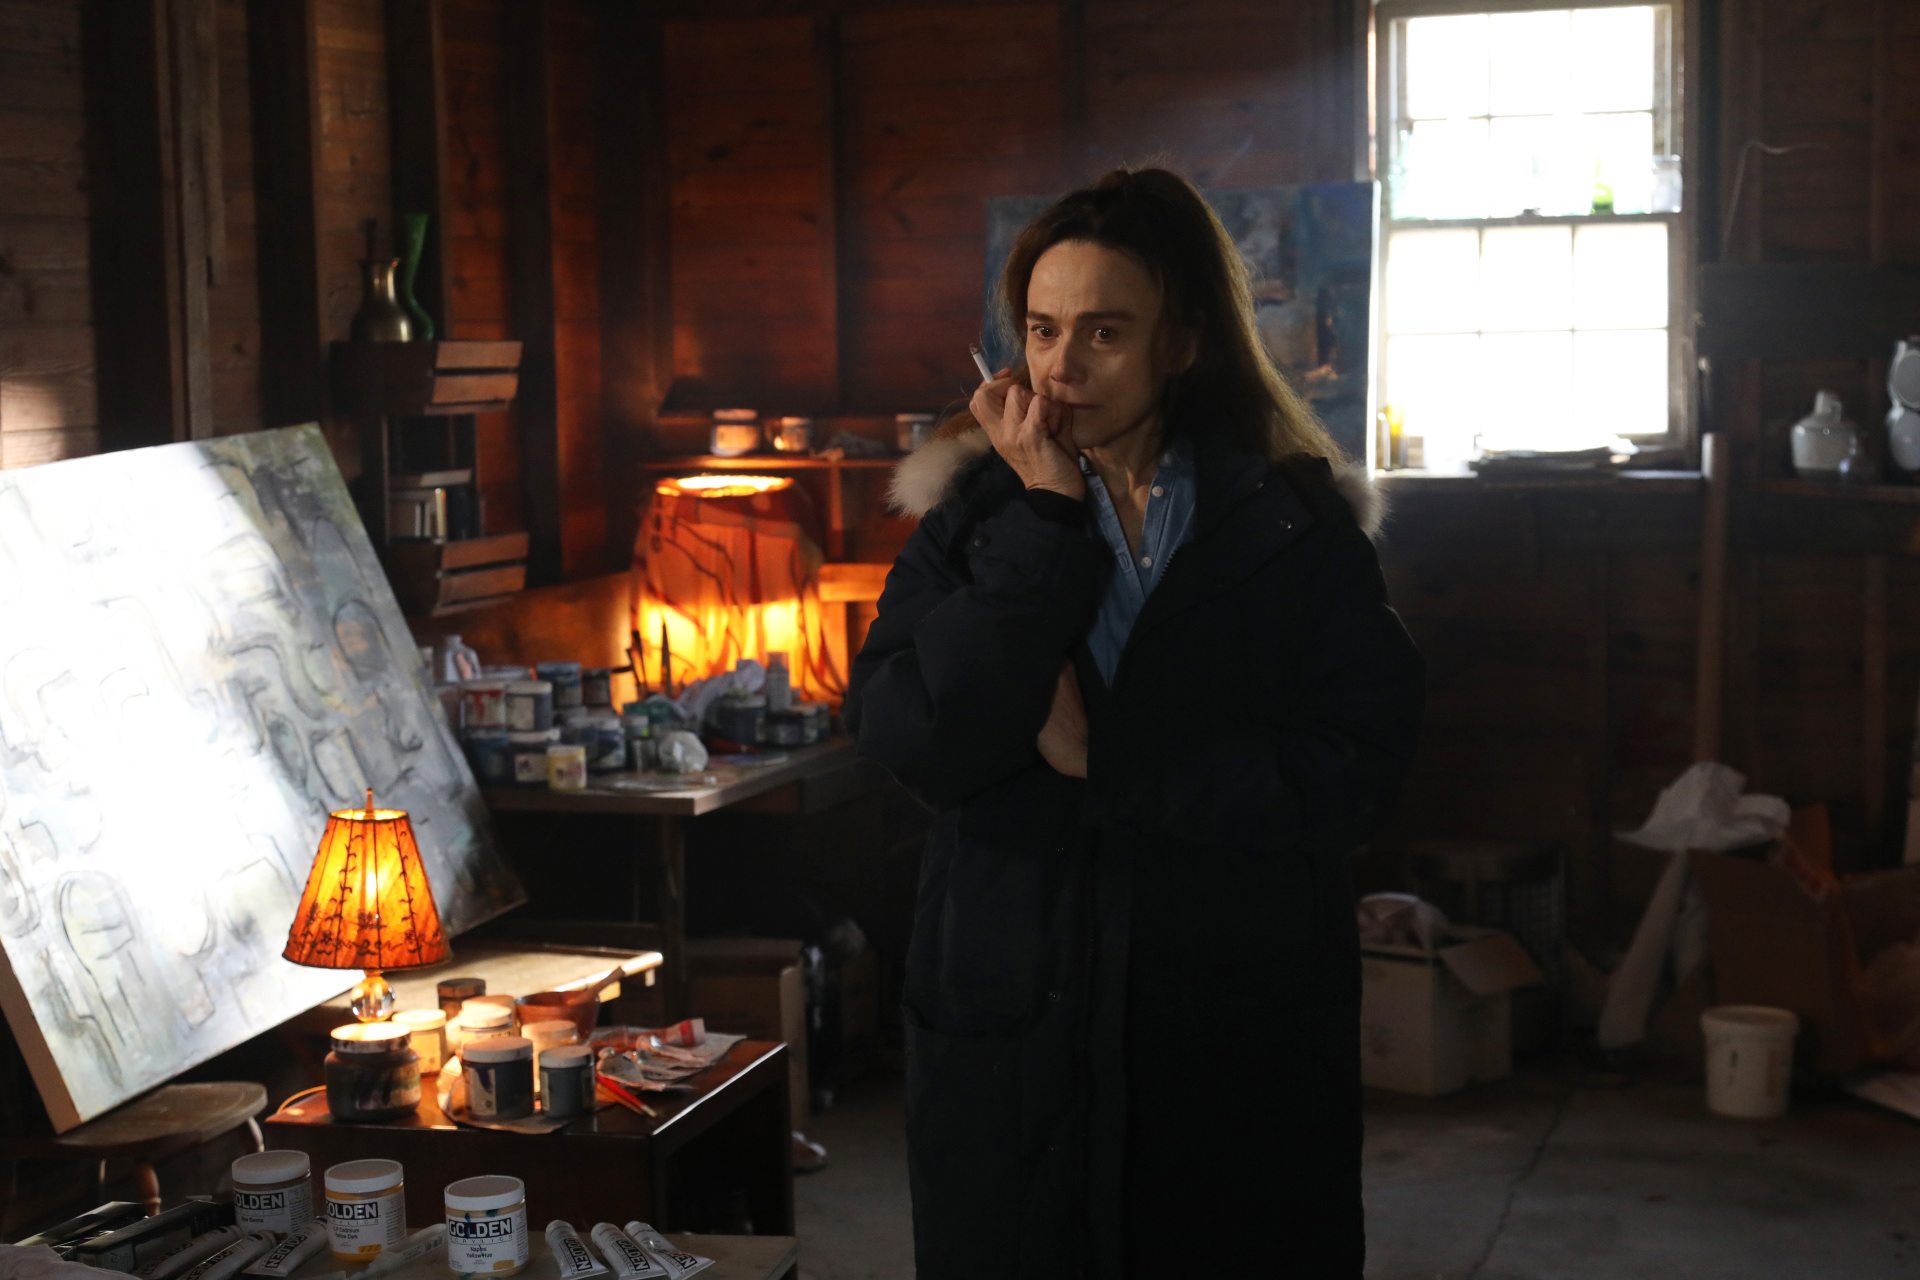 Claire (Lena Olin) thinks about her next move in her barn studio in THE ARTIST’S WIFE. Photo by Michael Lavine.